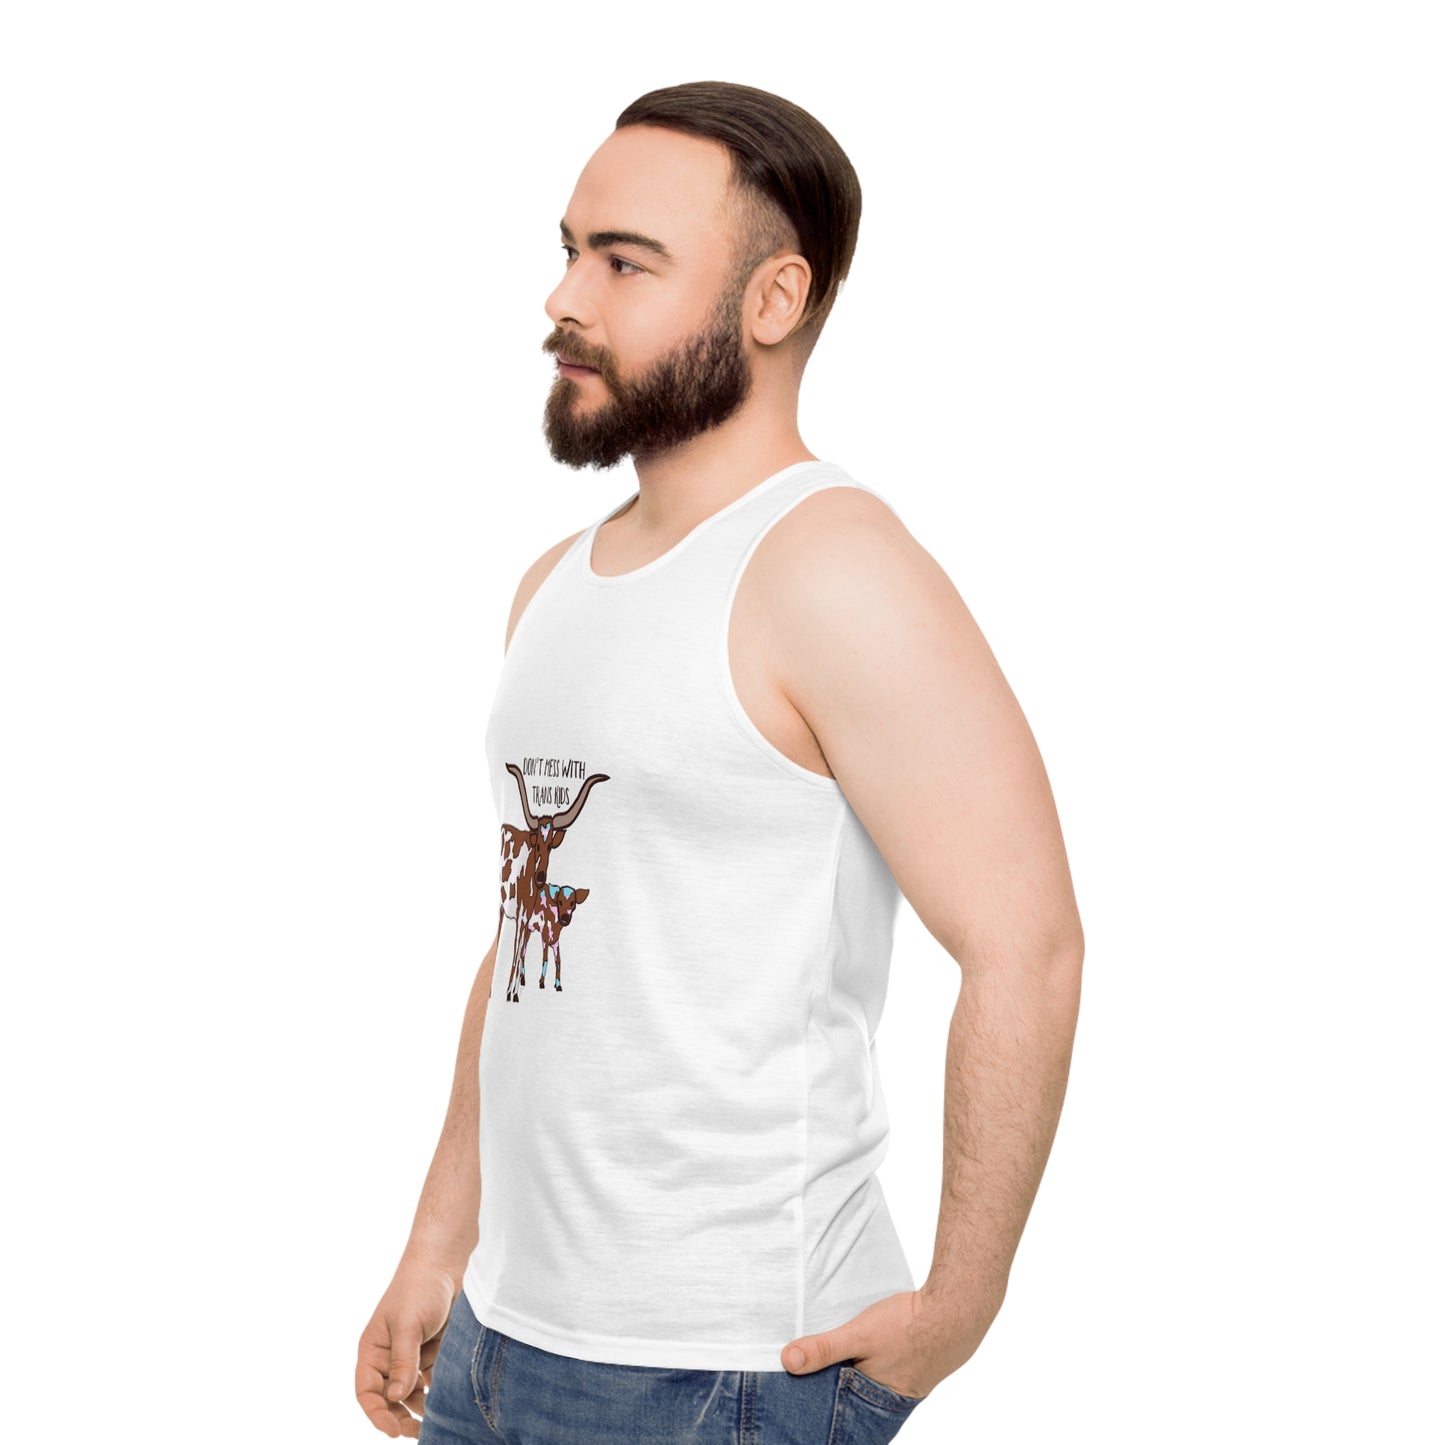 Don't Mess With Trans Kids - Unisex Tank Top